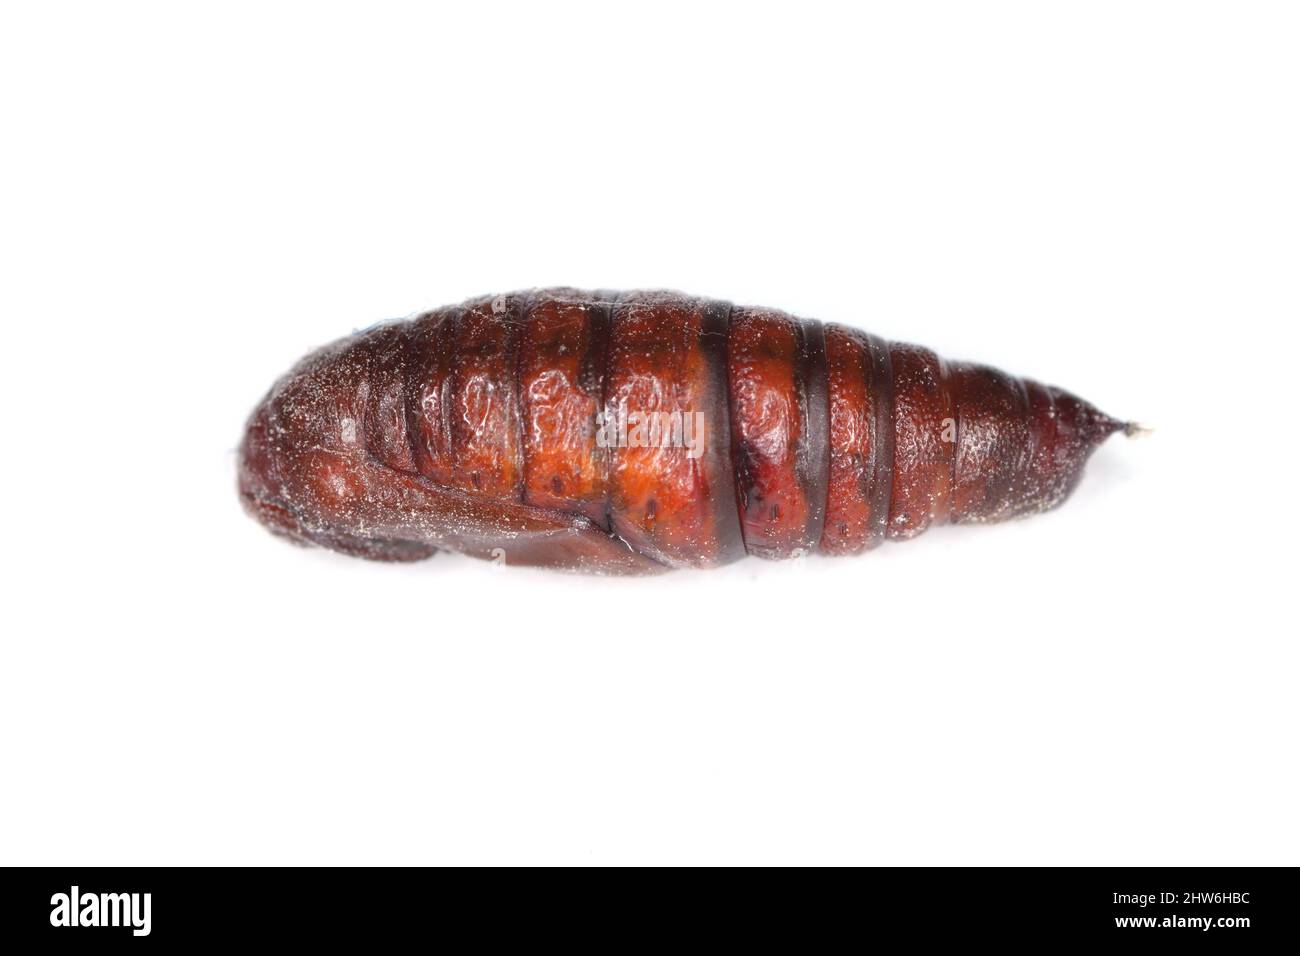 Pupa of the Silver Y (Autographa gamma) on white. It is a migratory moth of the family Noctuidae. Caterpillars of this owlet moths are plants pests. Stock Photo